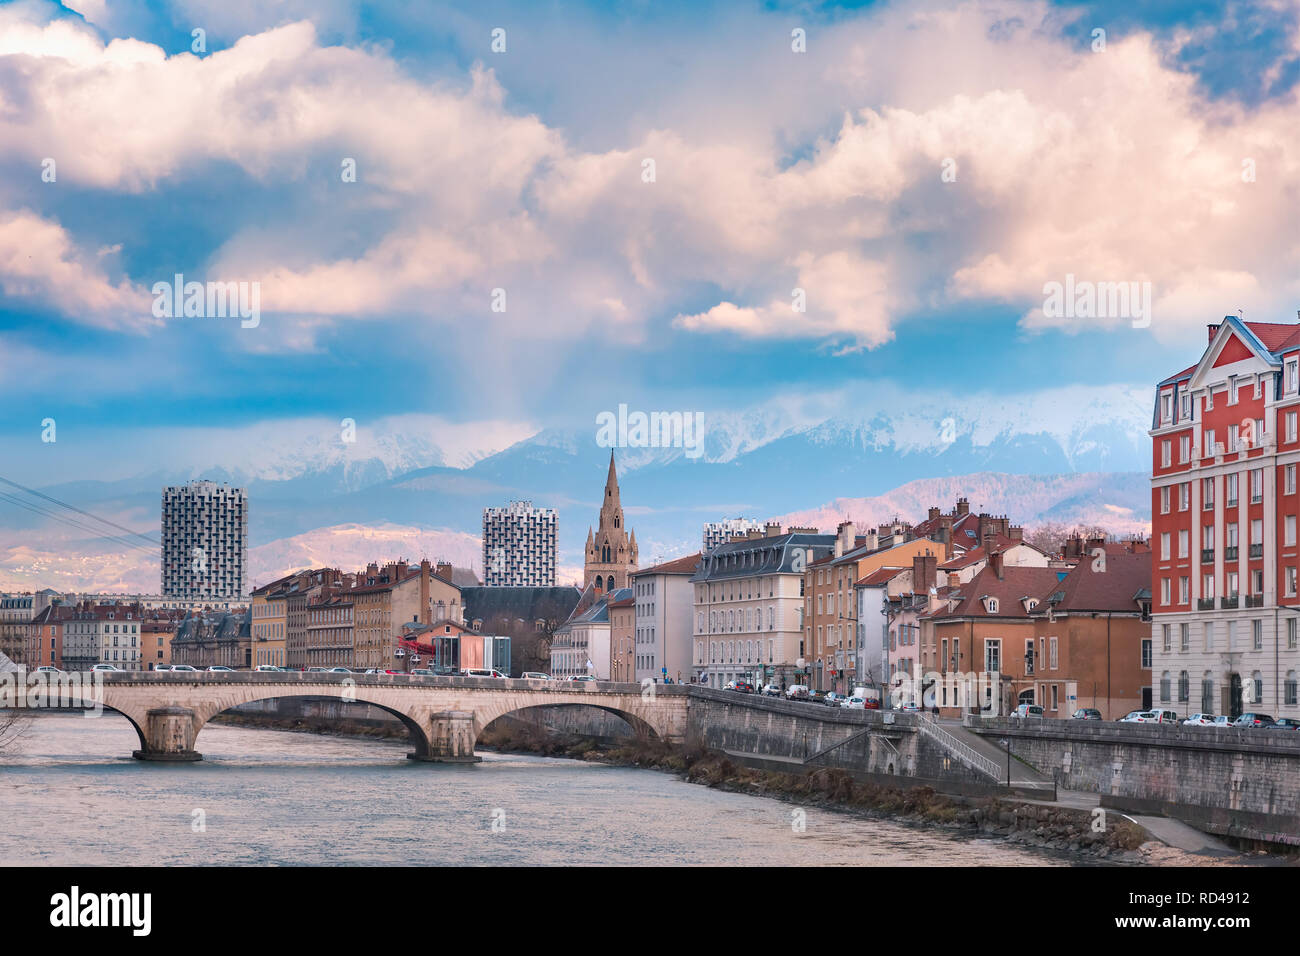 Church, Isere river and bridge in Grenoble, France Stock Photo